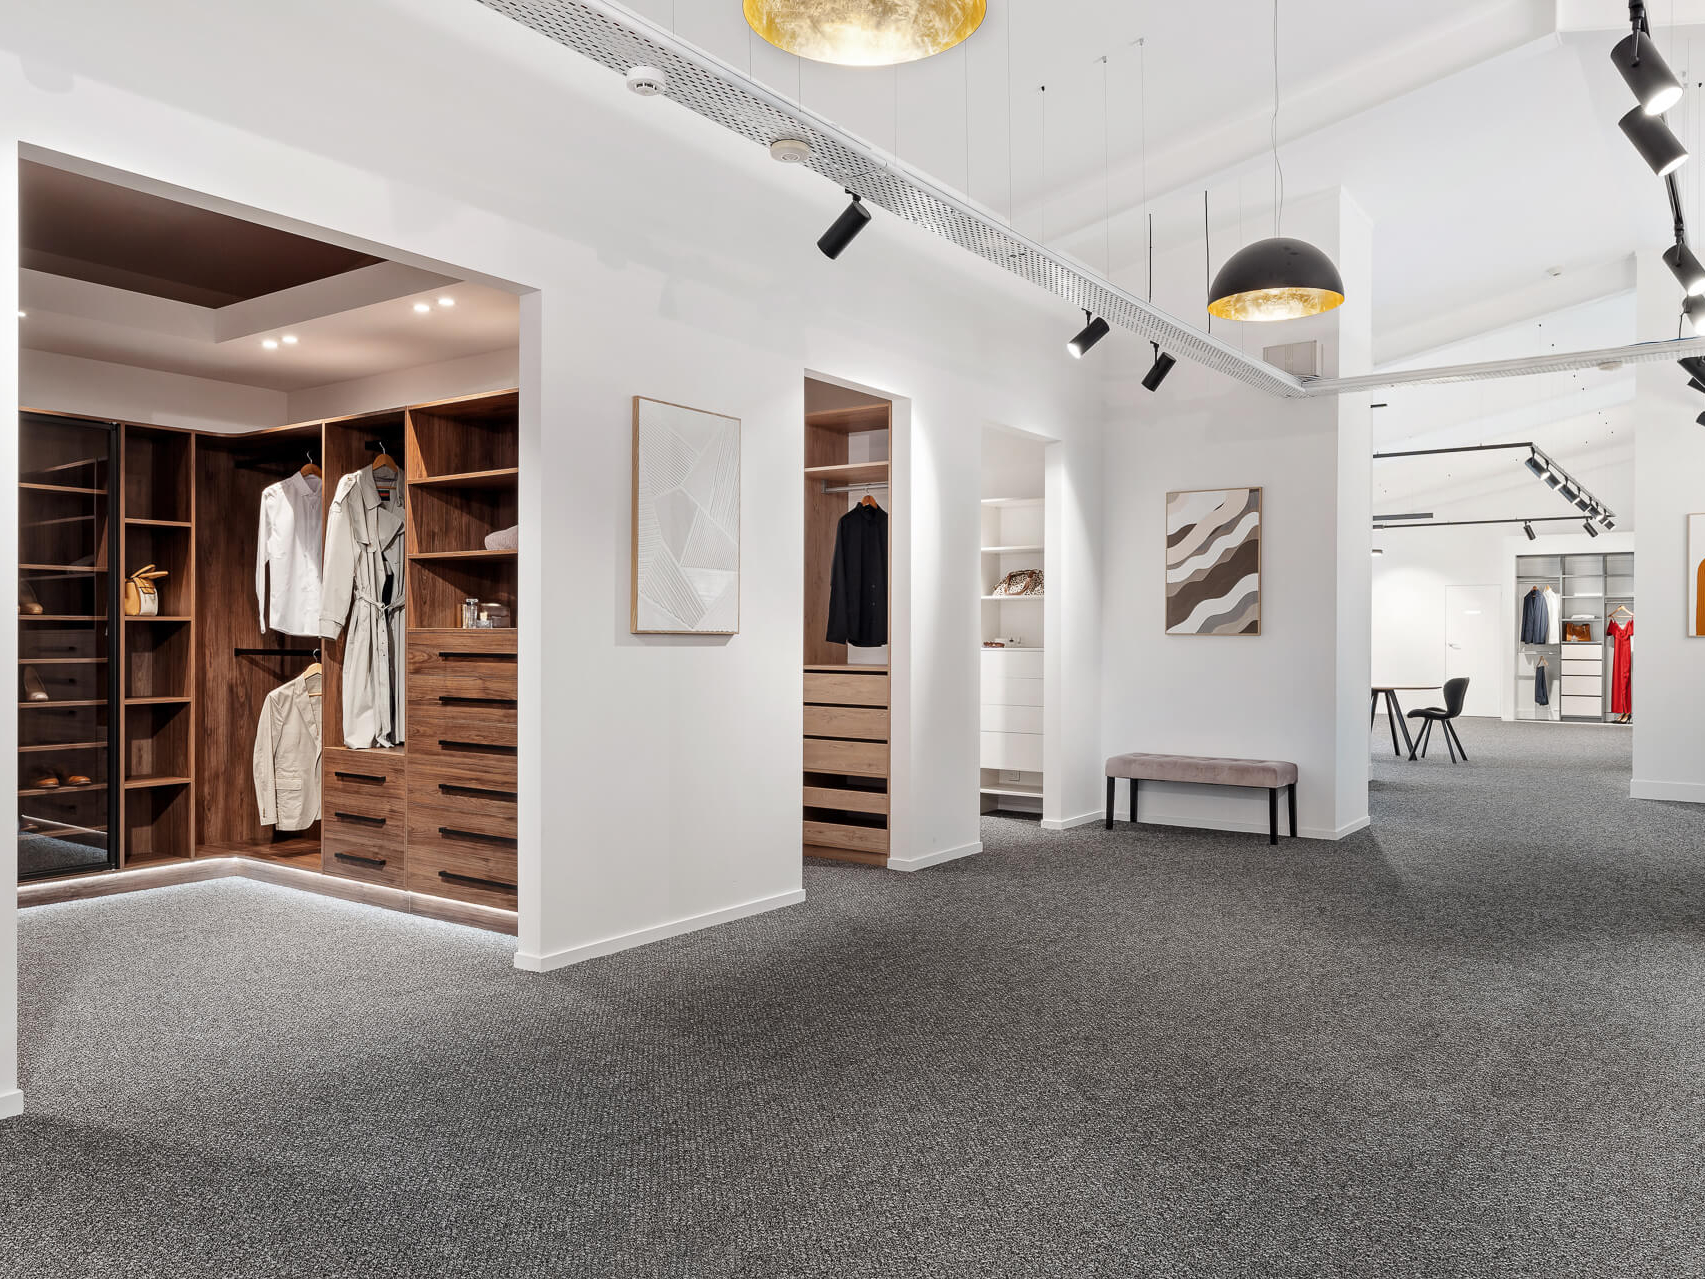 Boston Wardrobes showroom, you can see several walk-in wardrobes and reach-in wardrobes and wardrobe doors